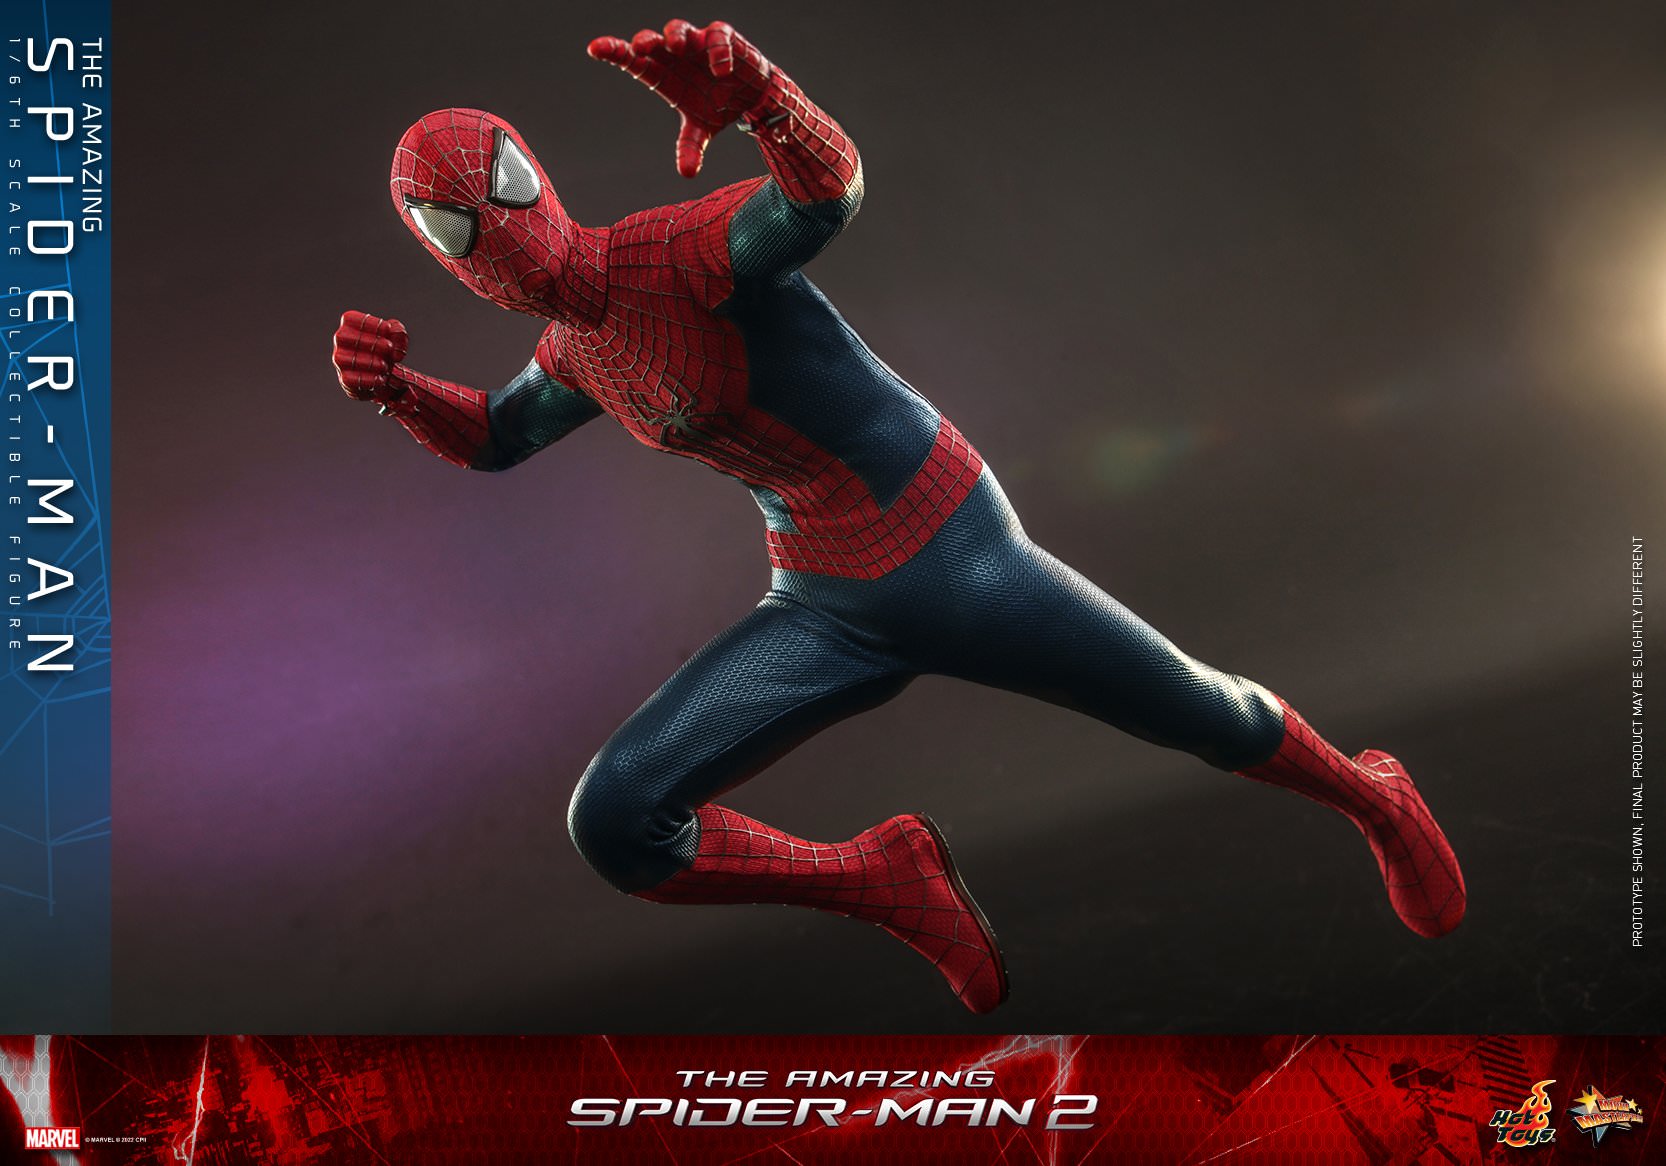 The Amazing Spider-Man: Andrew Garfield: The Amazing Spider-Man 2: Marvel: Hot Toys